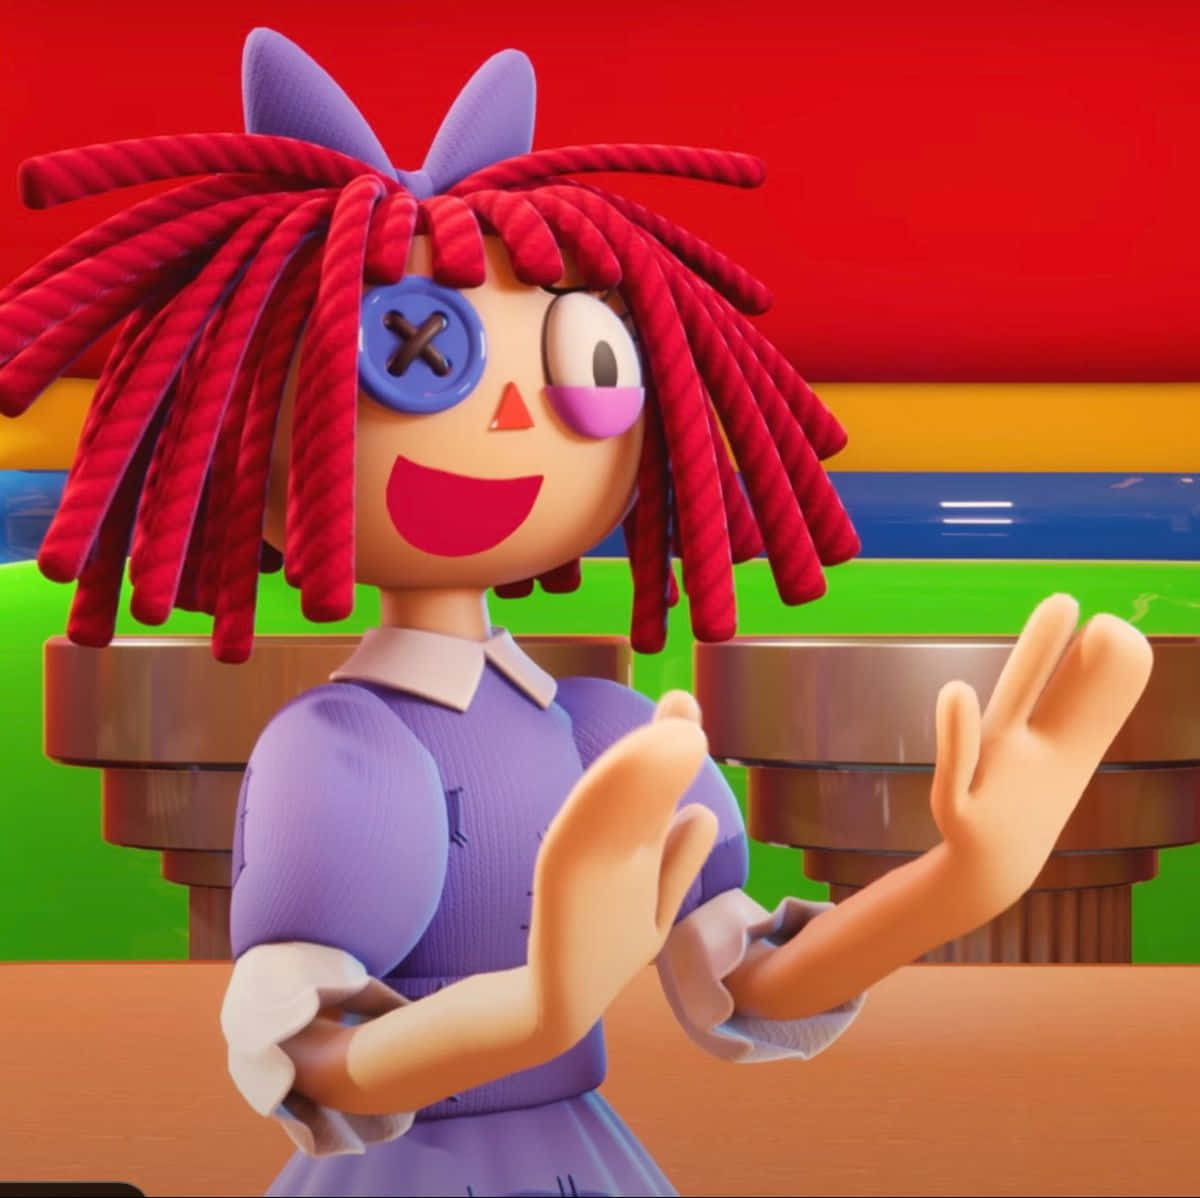 Colorful Animated Character With Button Eye Wallpaper